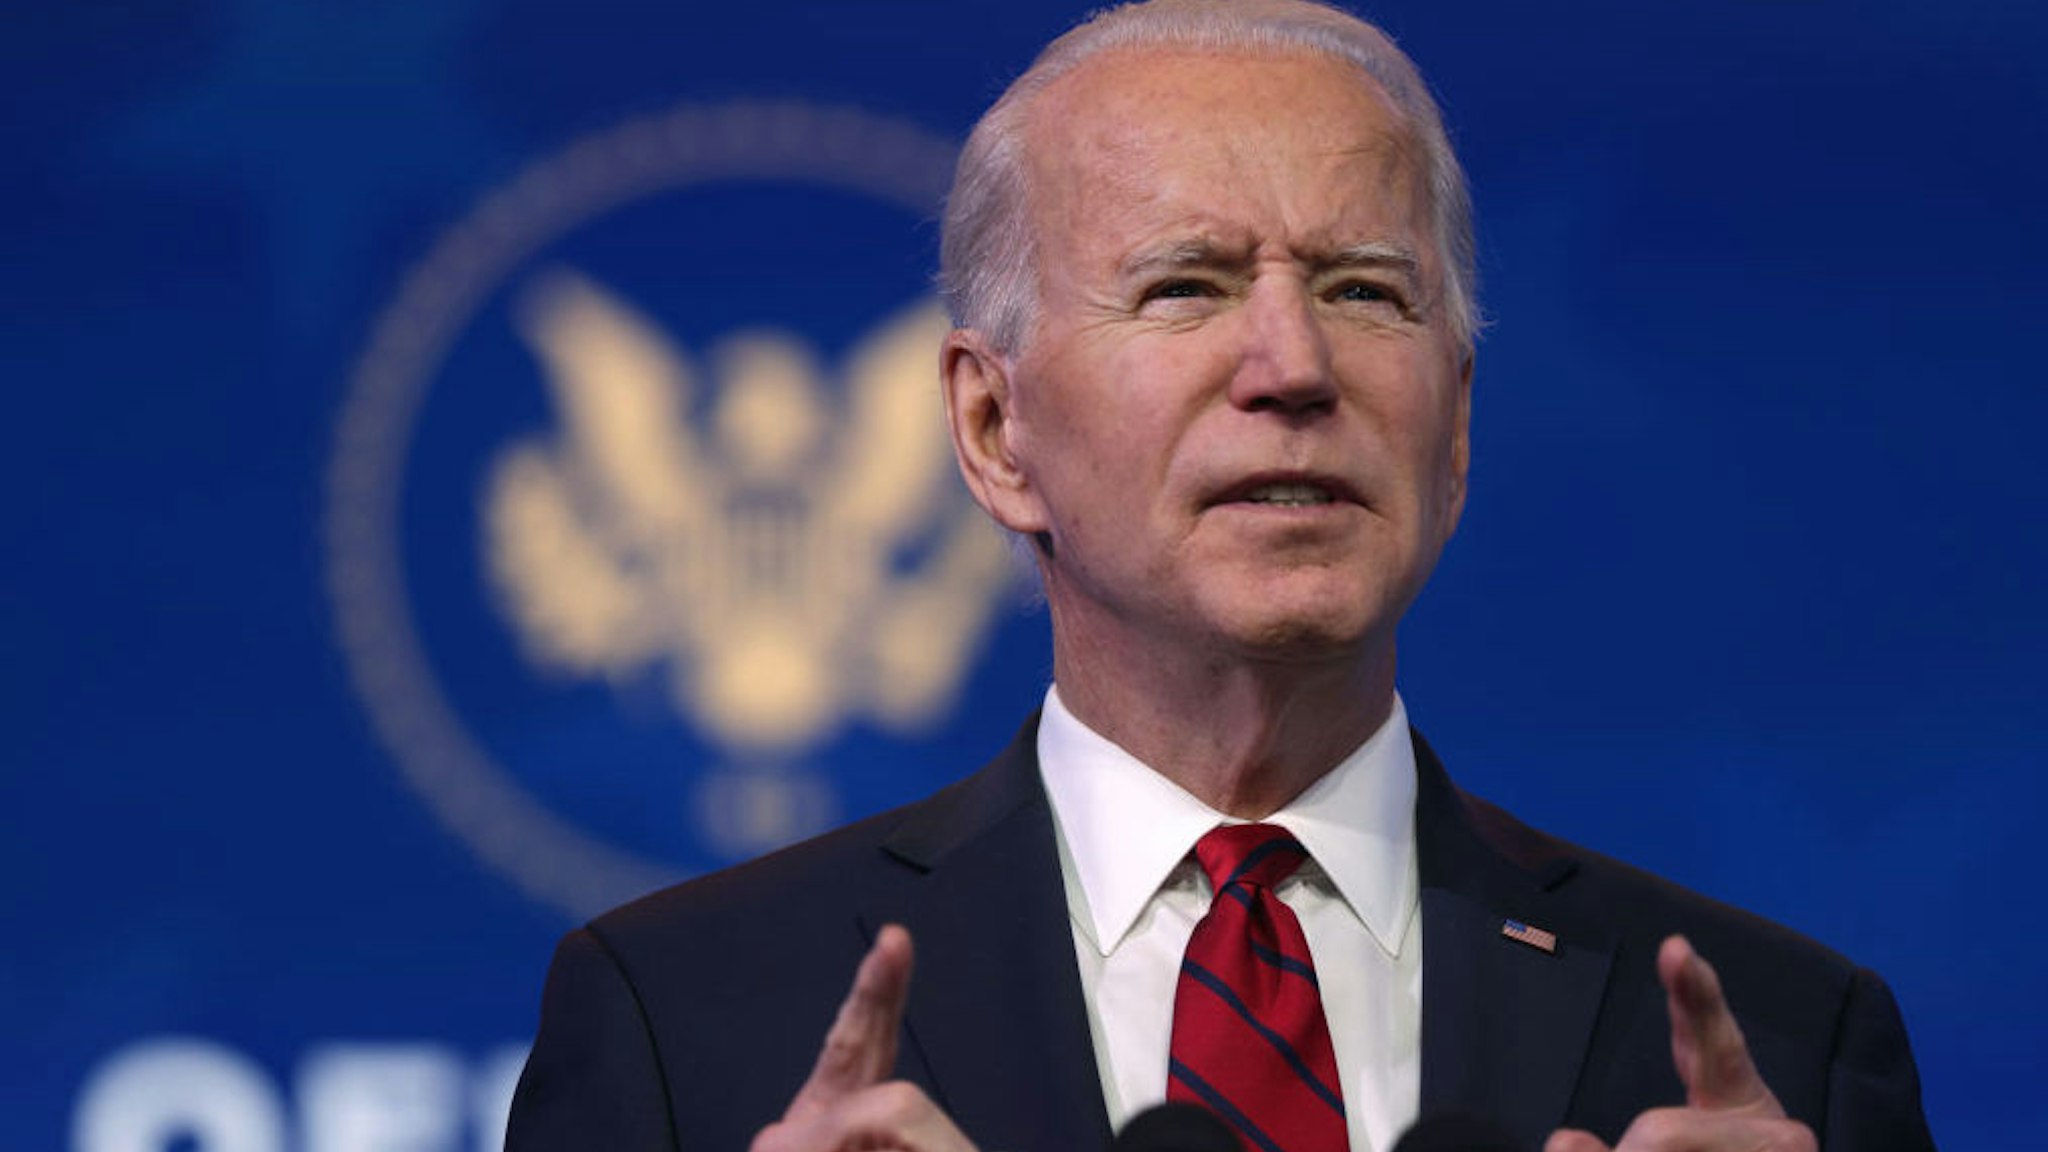 WILMINGTON, DELAWARE - JANUARY 15: U.S. President-elect Joe Biden speaks during day two of laying out his plan on combating the coronavirus at the Queen theater January 15, 2021 in Wilmington, Delaware. President-elect Biden is announcing his plan to administer COVID-19 vaccines to Americans.